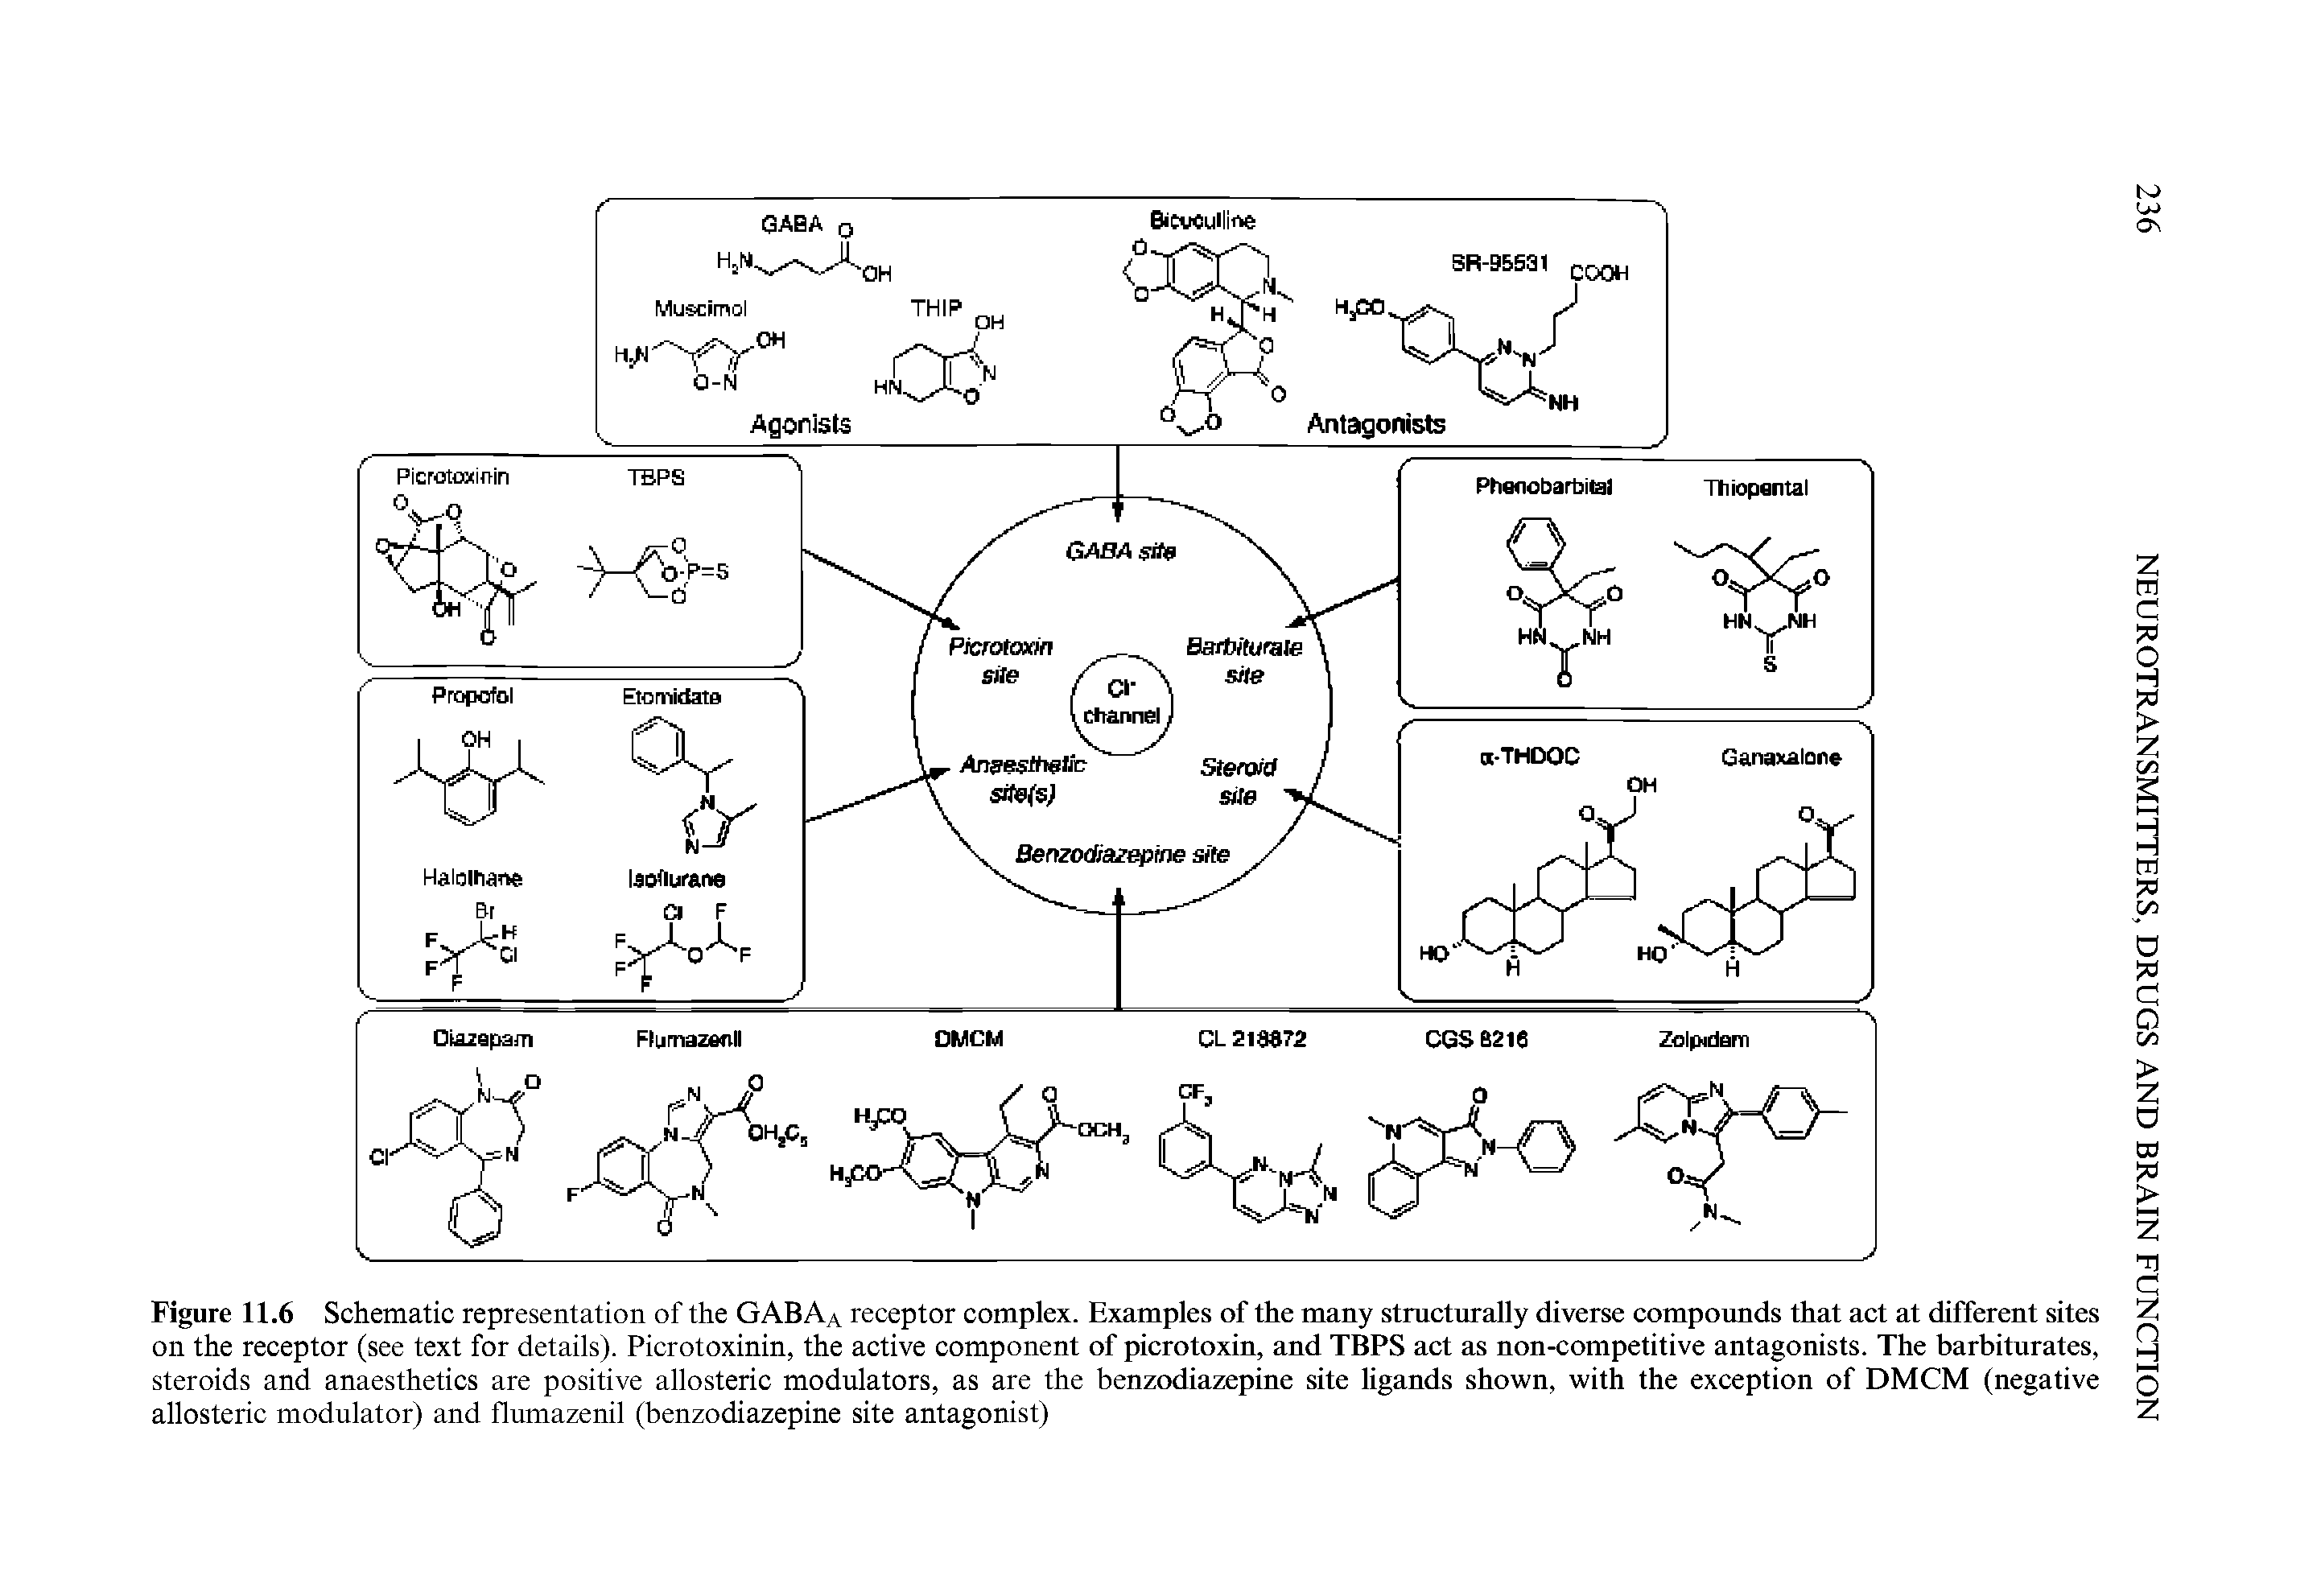 Figure 11.6 Schematic representation of the GABAa receptor complex. Examples of the many structurally diverse compounds that act at different sites on the receptor (see text for details). Picrotoxinin, the active component of picrotoxin, and TBPS act as non-competitive antagonists. The barbiturates, steroids and anaesthetics are positive allosteric modulators, as are the benzodiazepine site ligands shown, with the exception of DMCM (negative allosteric modulator) and flumazenil (benzodiazepine site antagonist)...